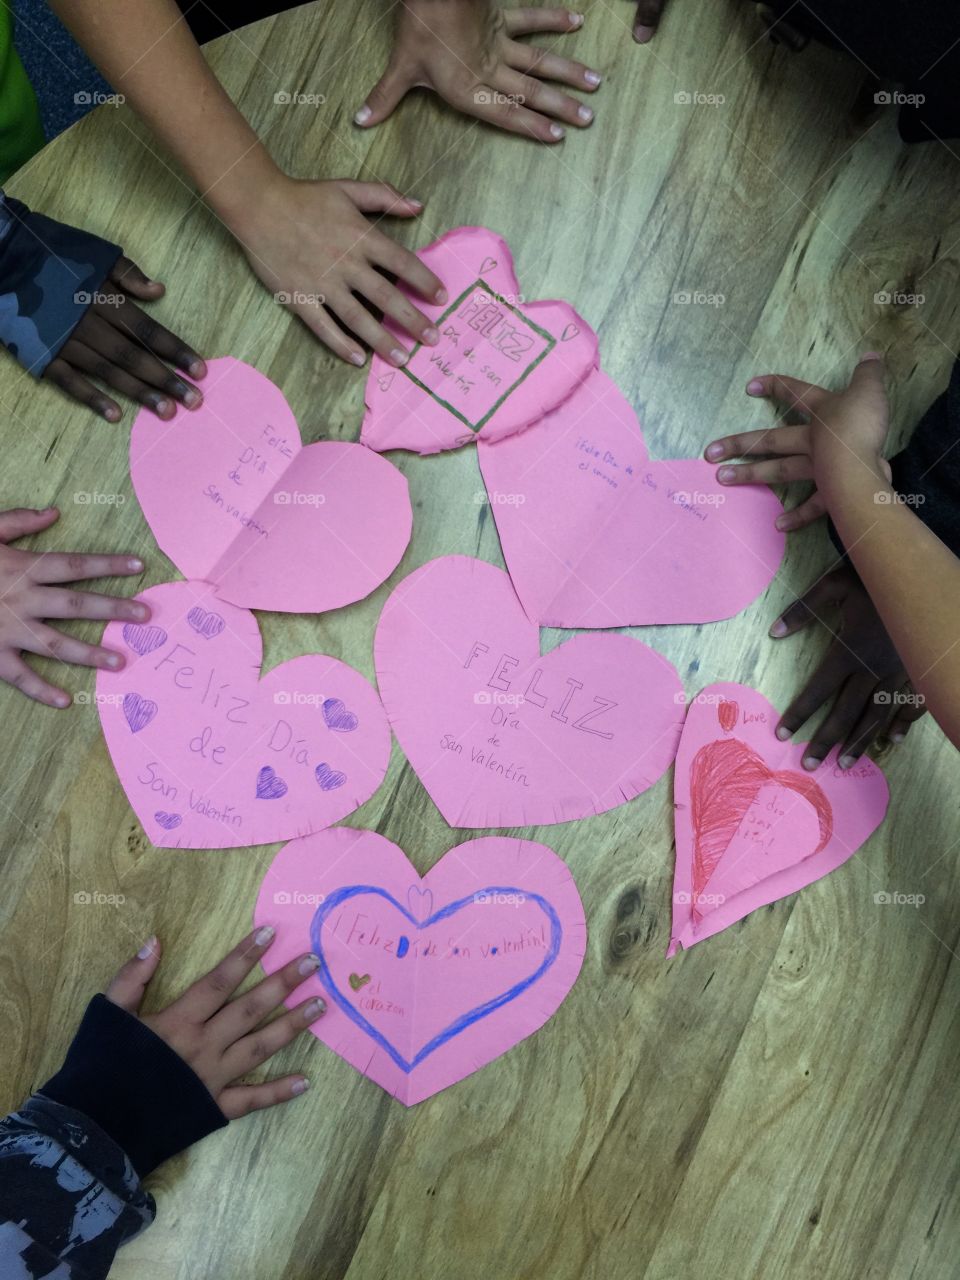 Multiple pink paper handmade hearts for Valentine’s Day surrounded by children’s hands